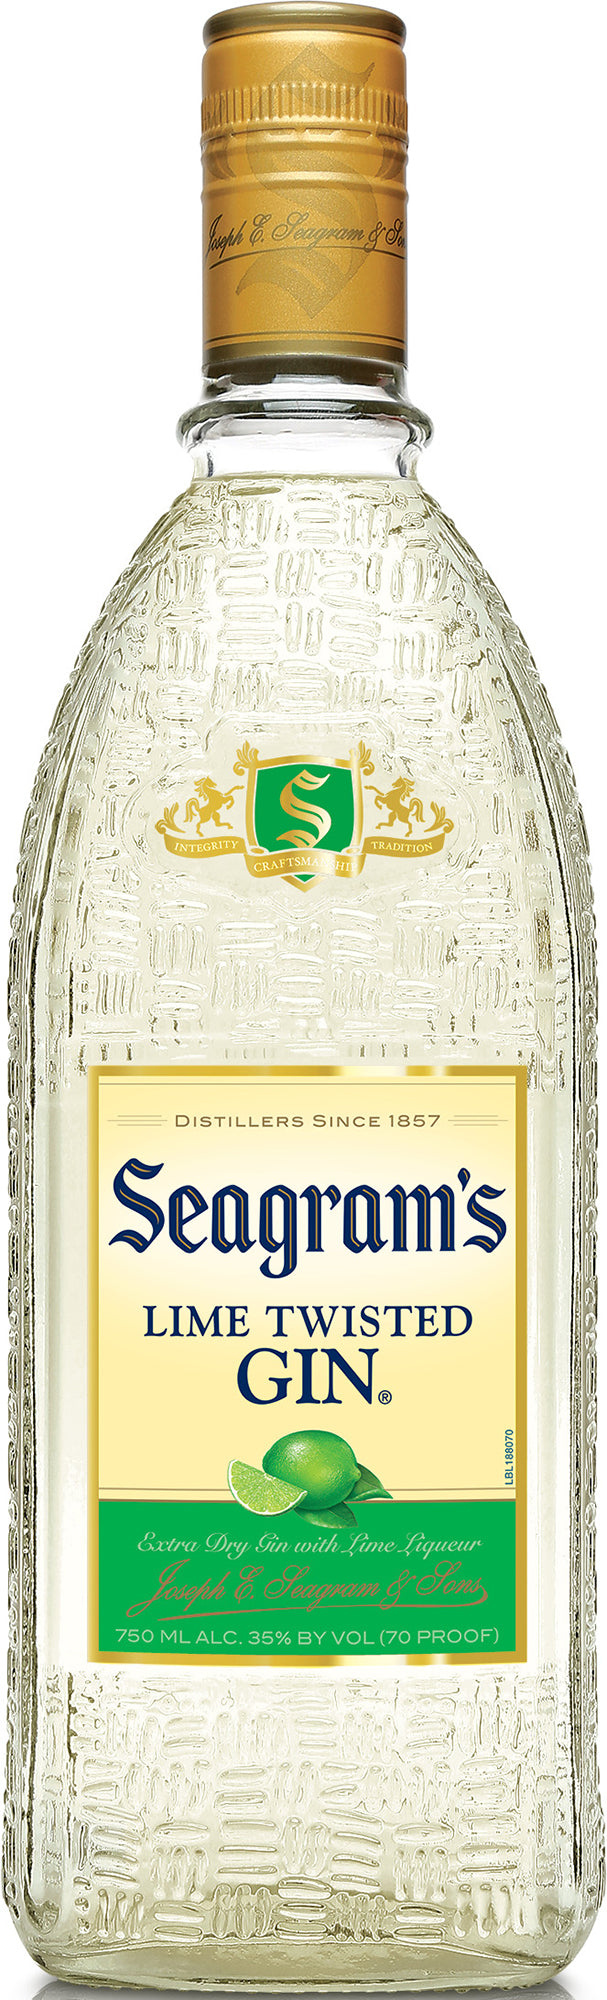 SEAGRAM'S LIME TWISTED GIN